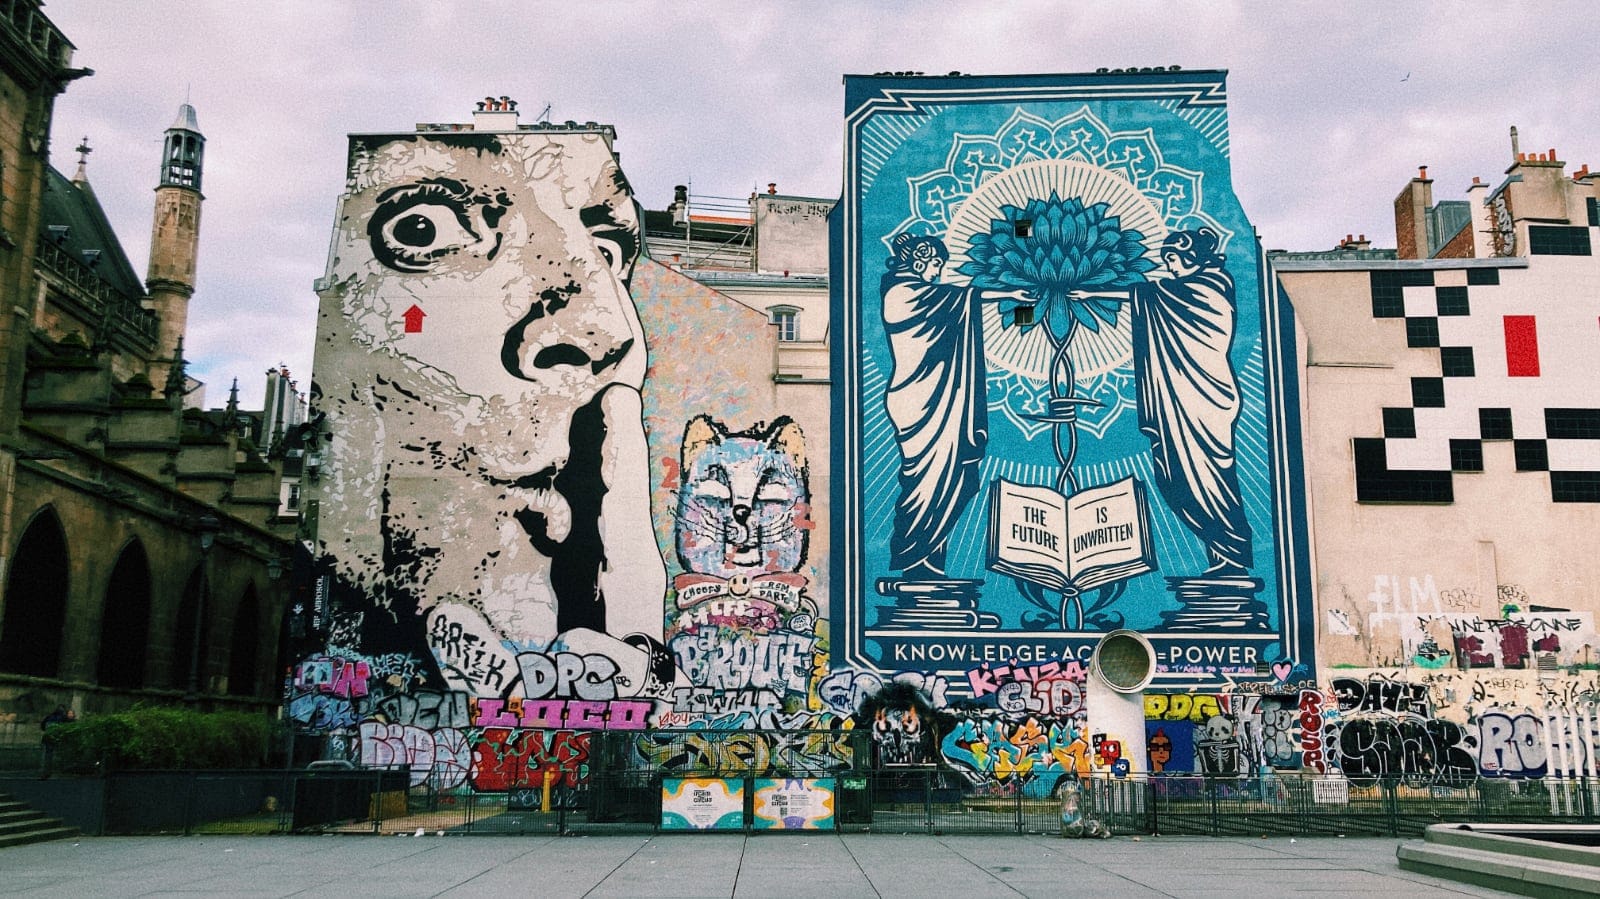 A photo of giant murals in Paris. On the right, there is one by Shepard Farey called "The Future is Unwritten" showing two women standing on a pile of books and holding a lotus flower